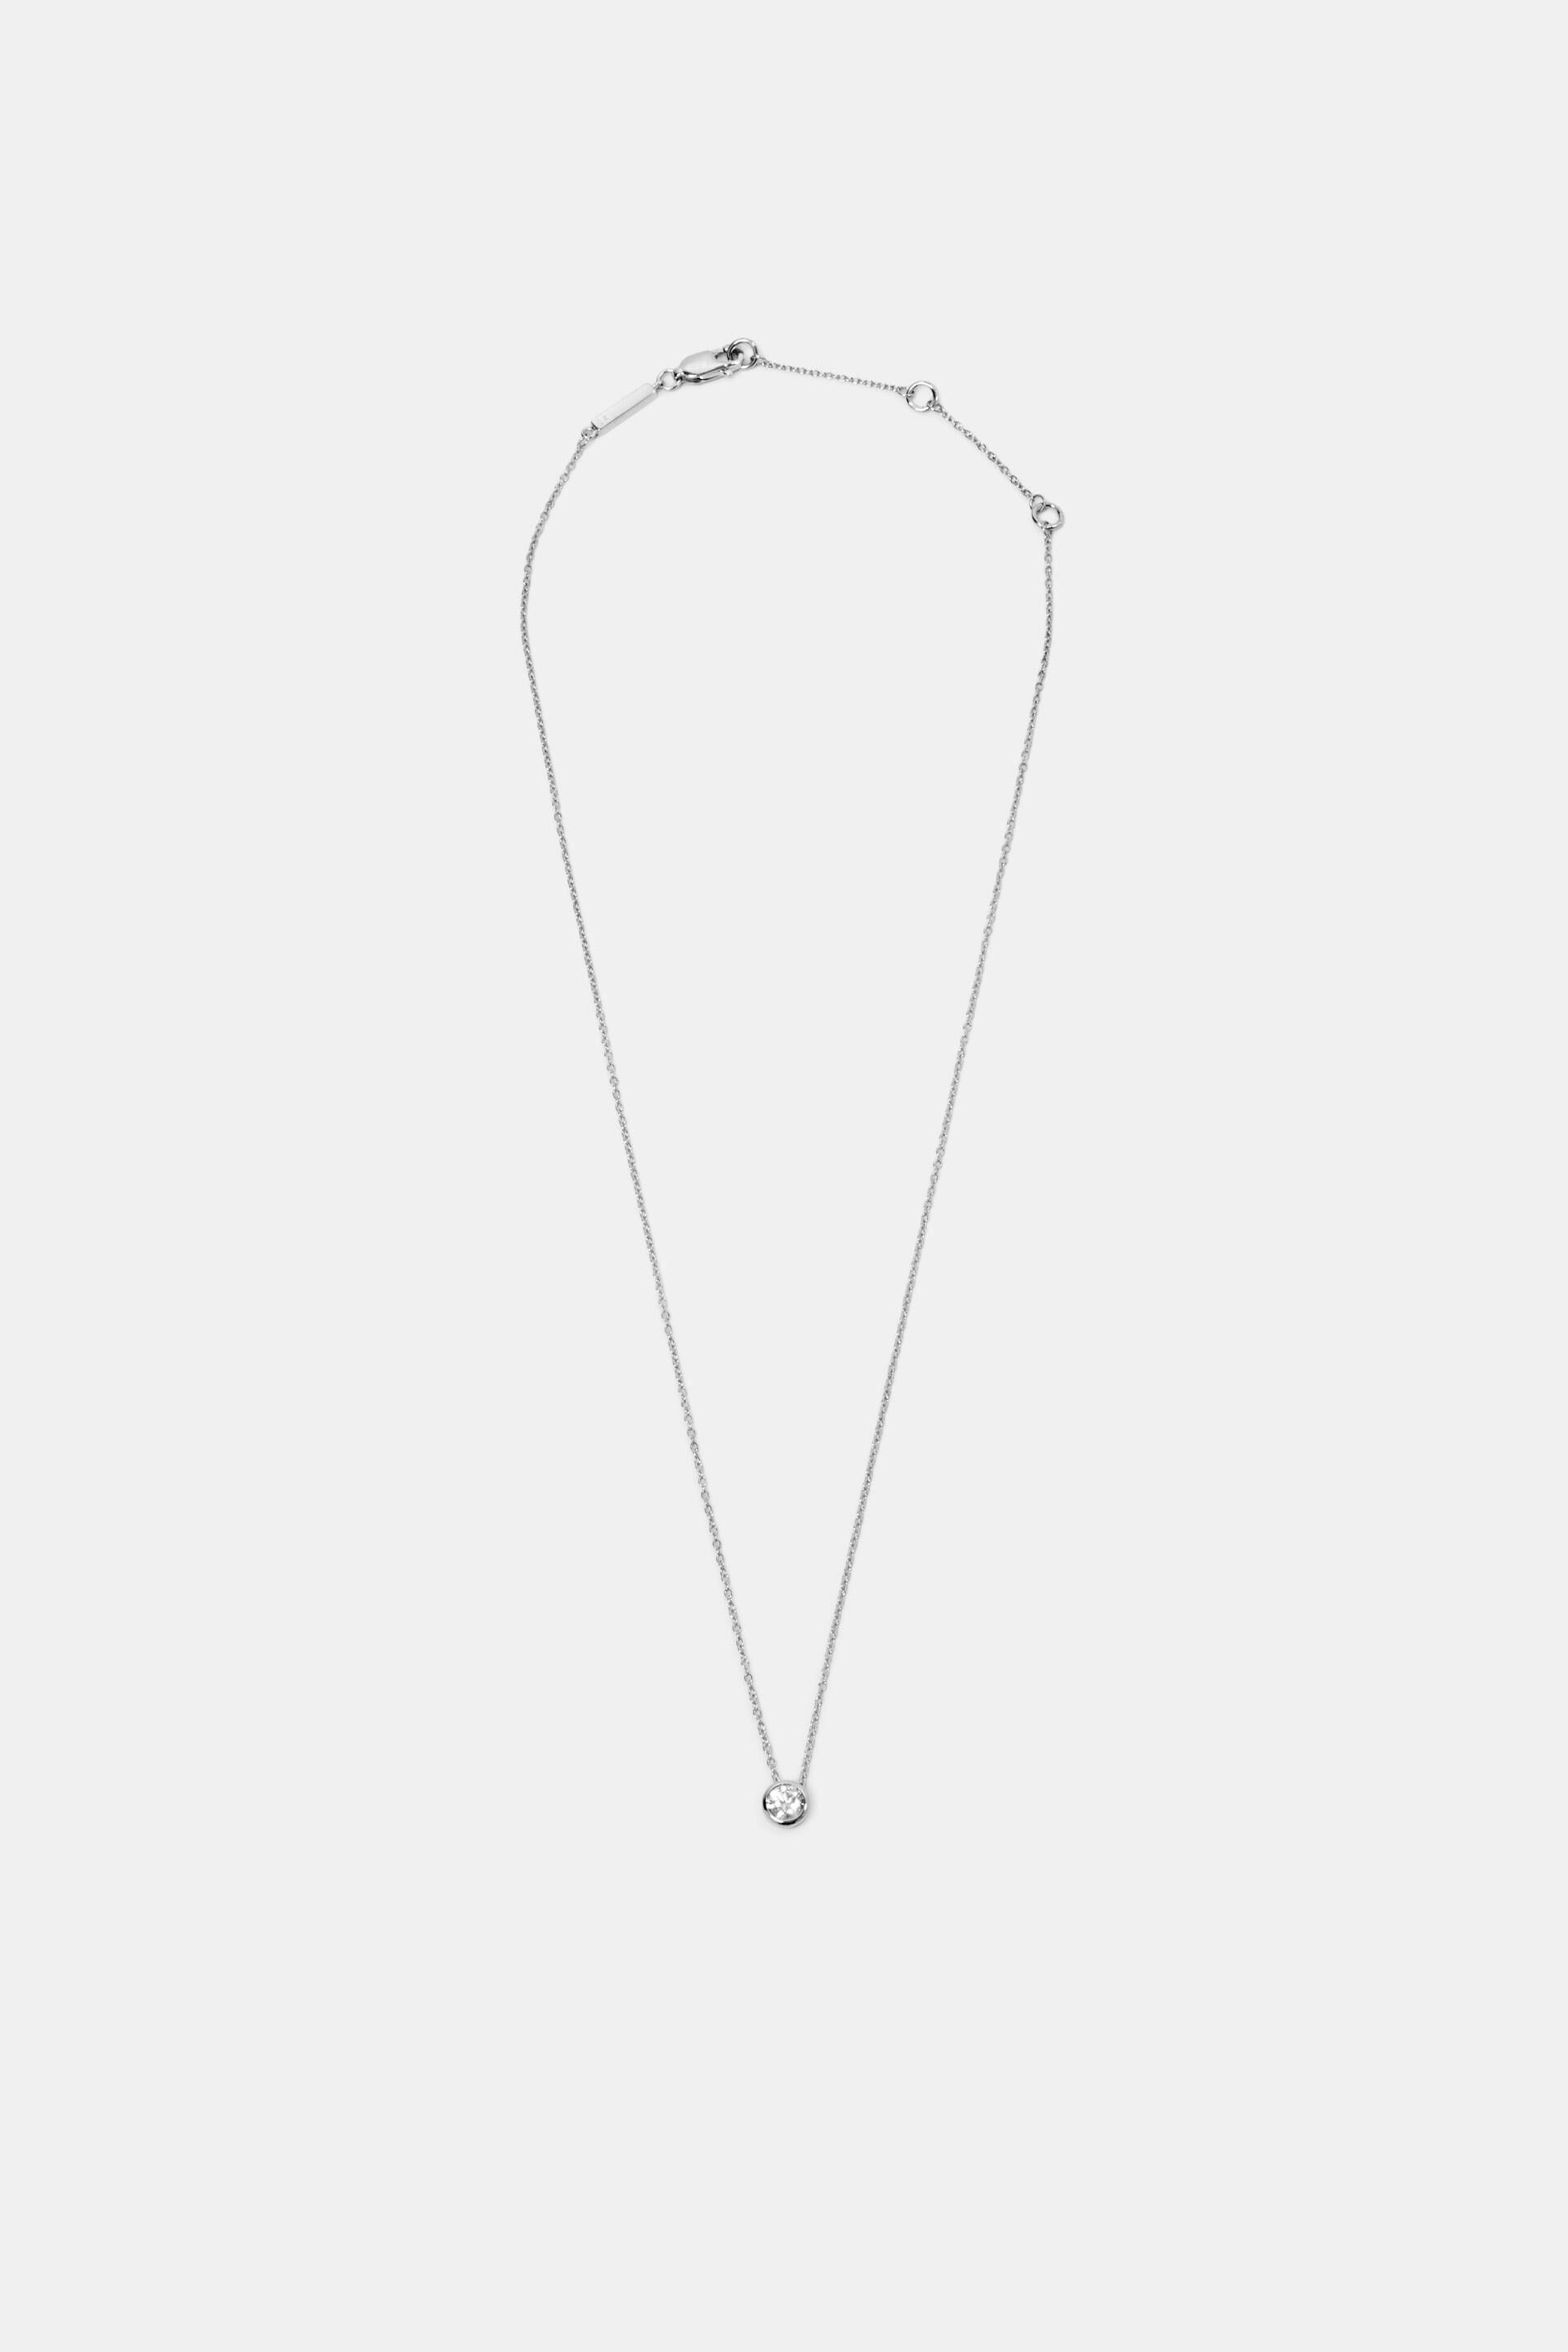 Esprit Online Store Necklace with zirconia, sterling silver